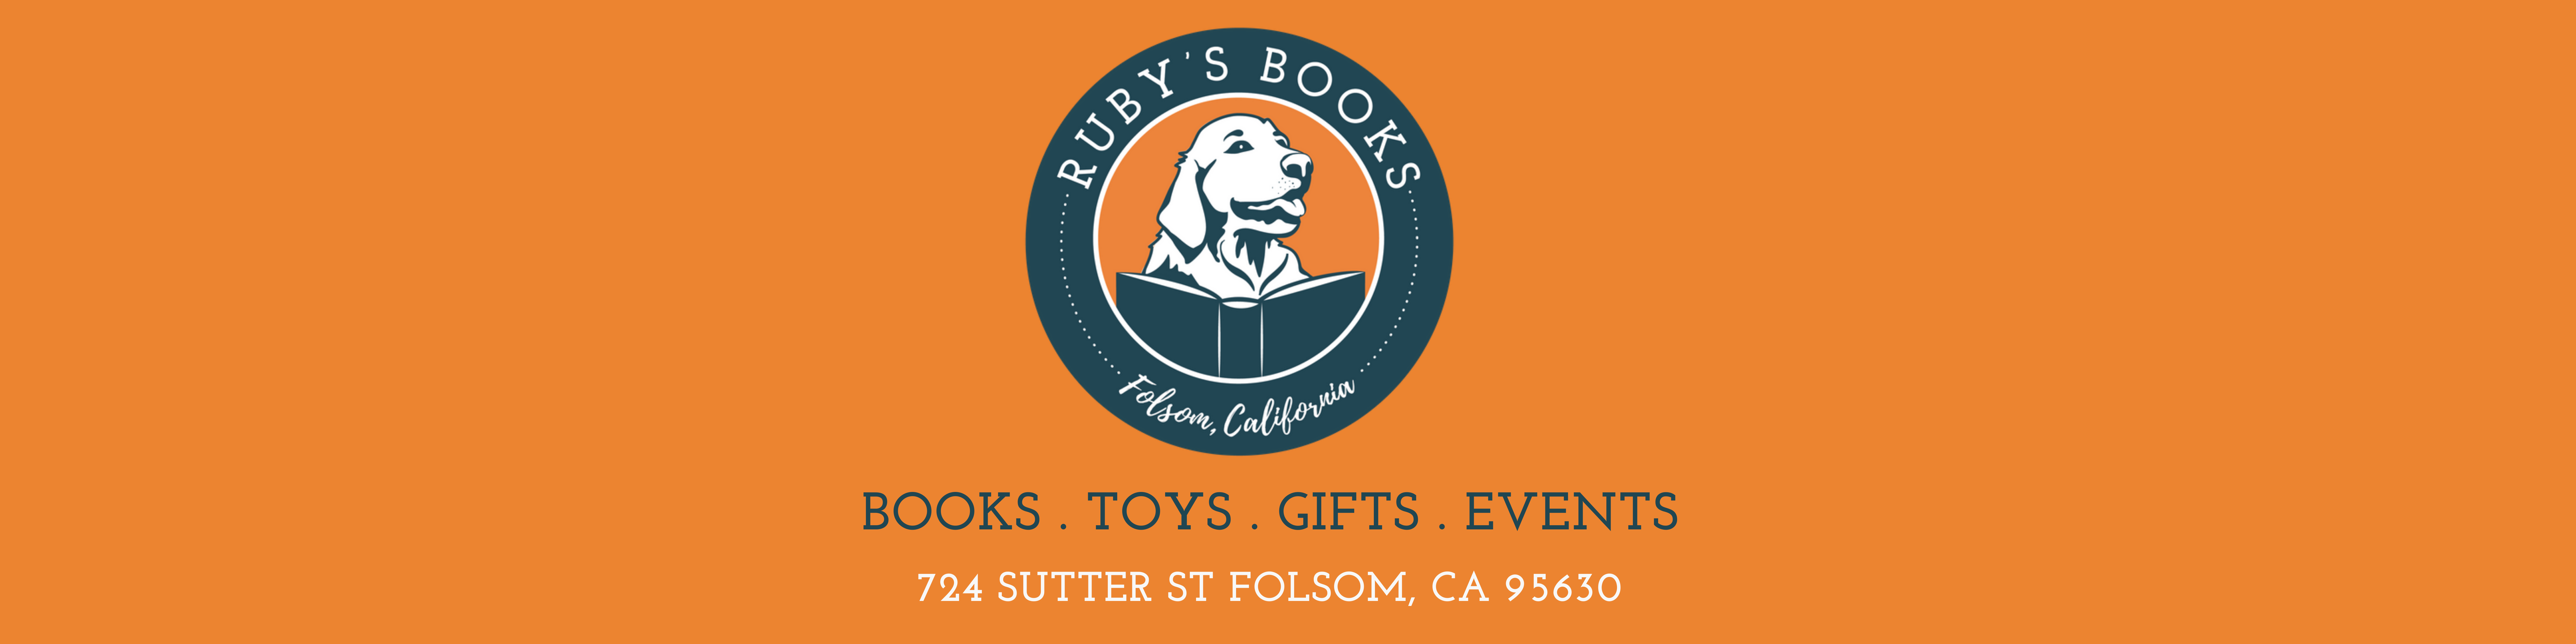 Bookstore - Friends of the Folsom Library